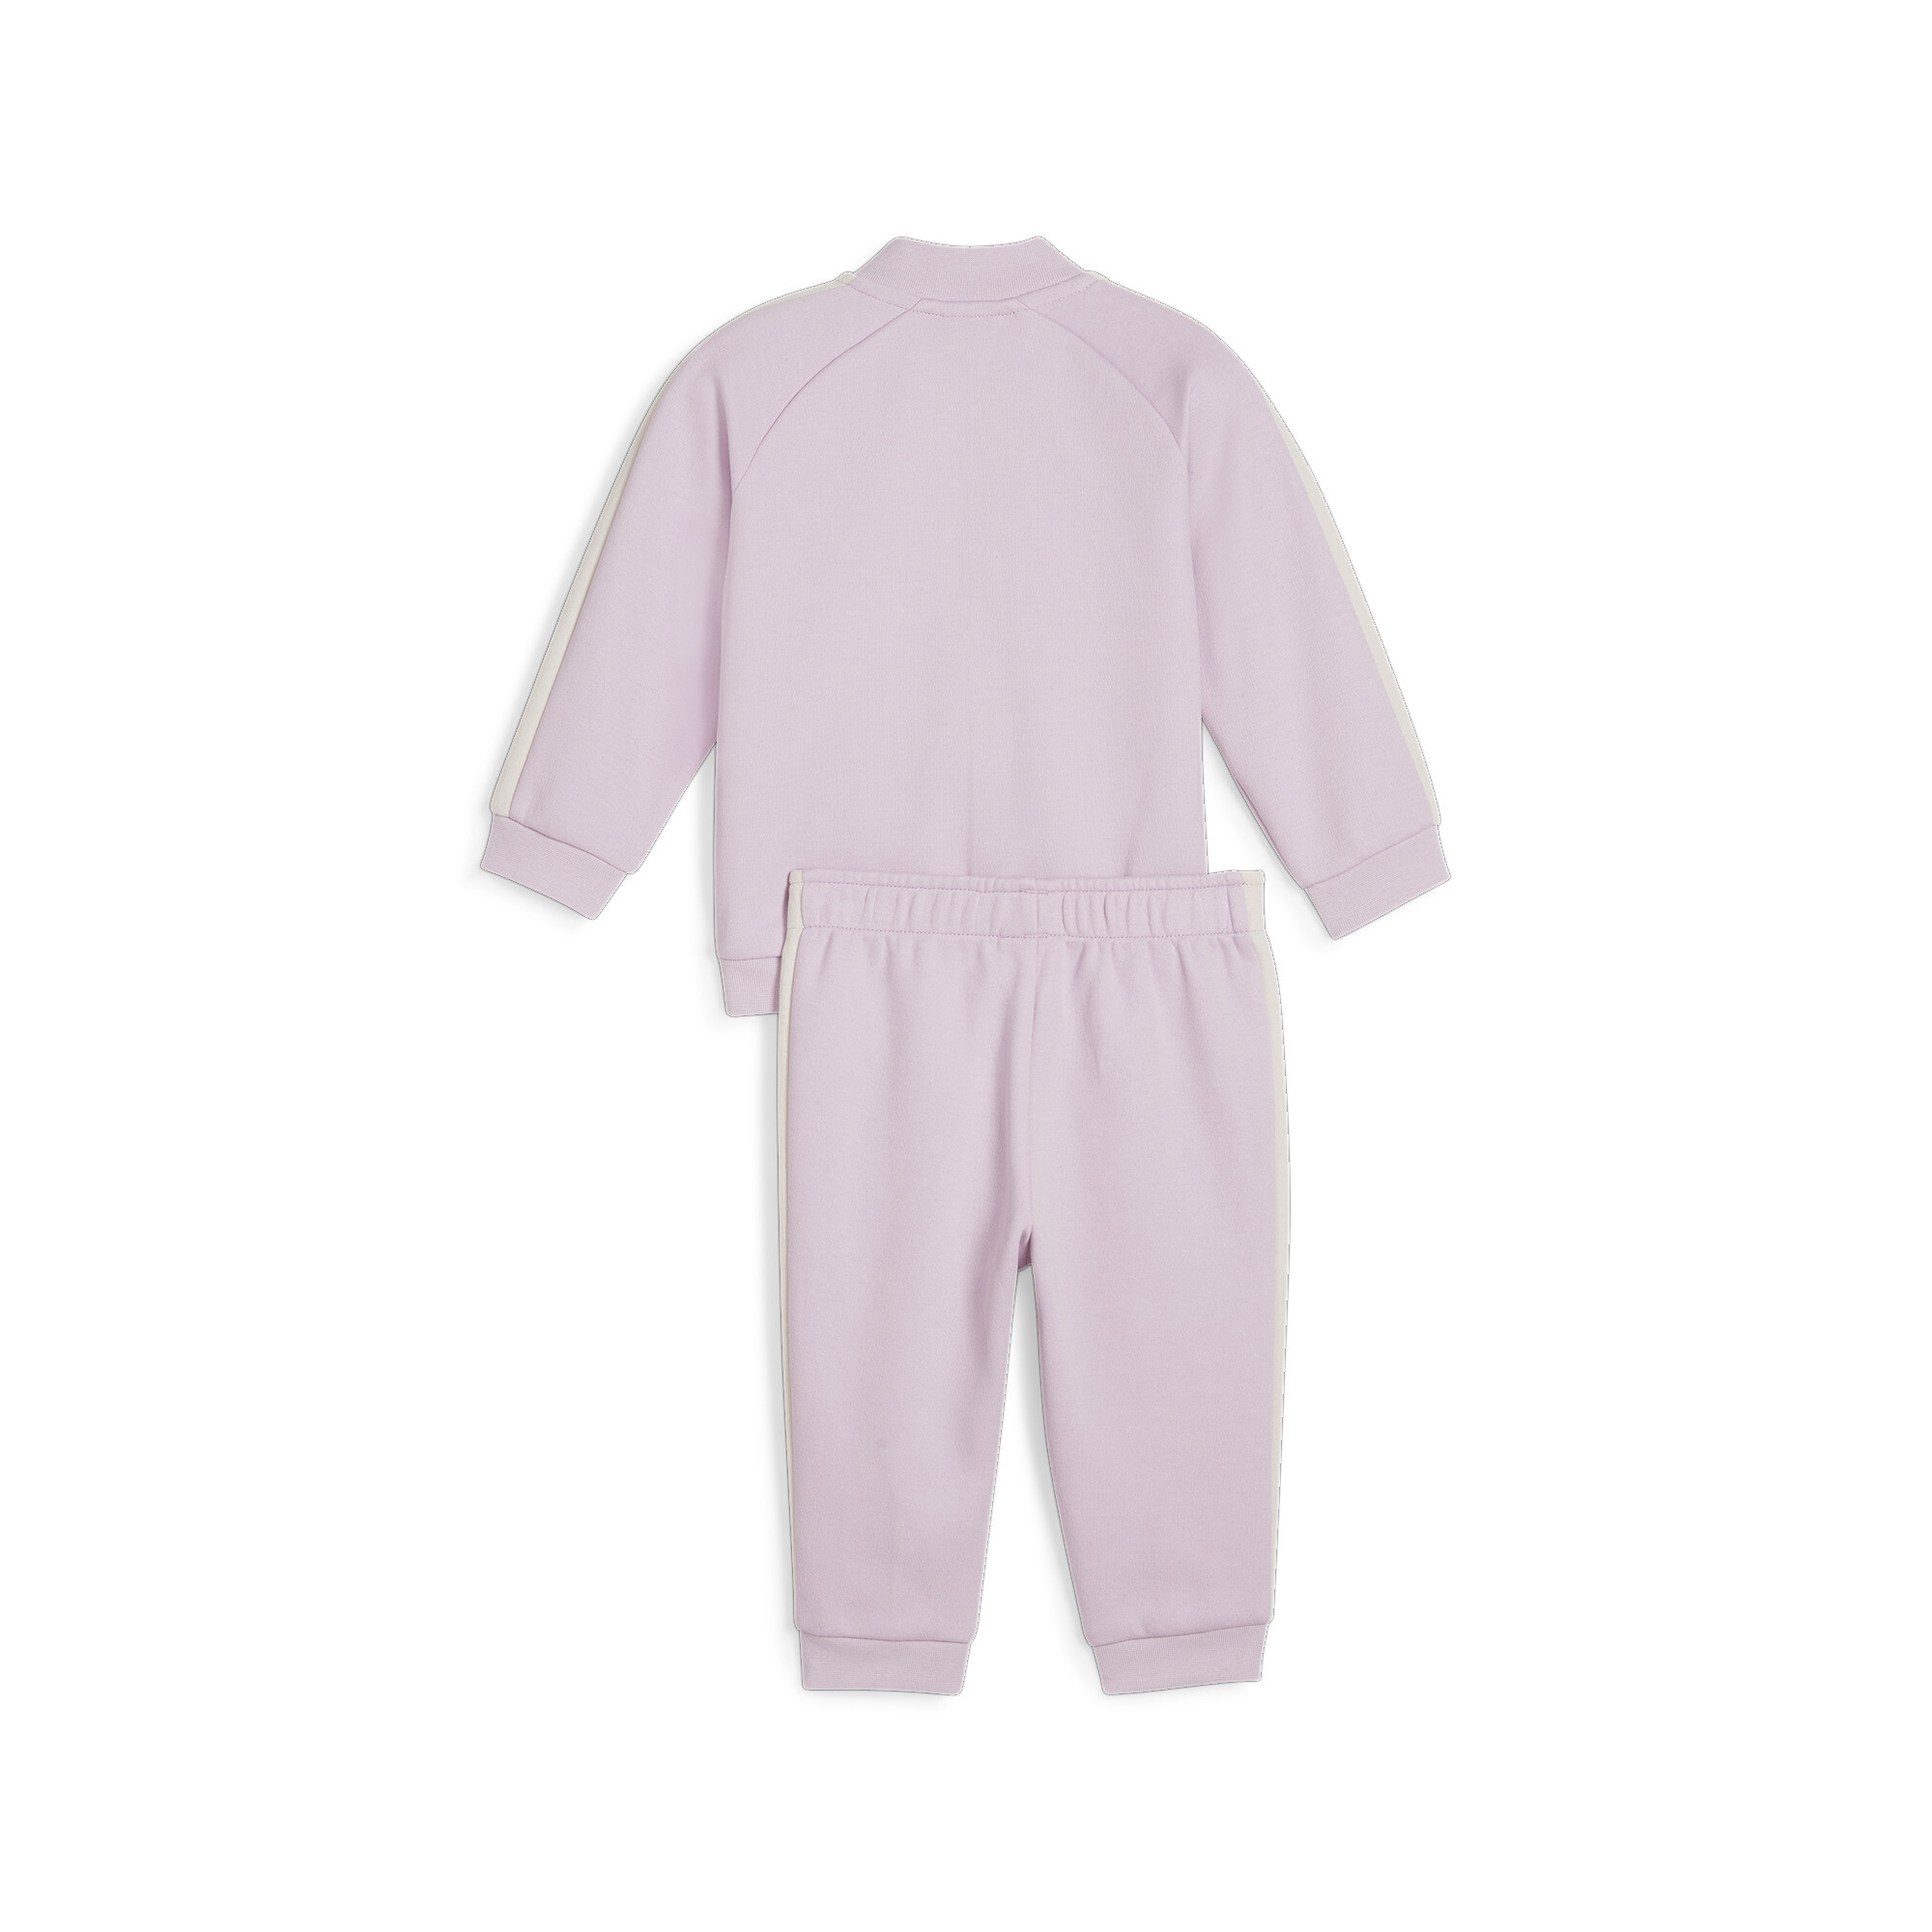 Kids' PUMA MINICATS T7 ICONIC Baby Tracksuit Set In 90 - Purple, Size 9-12 Months